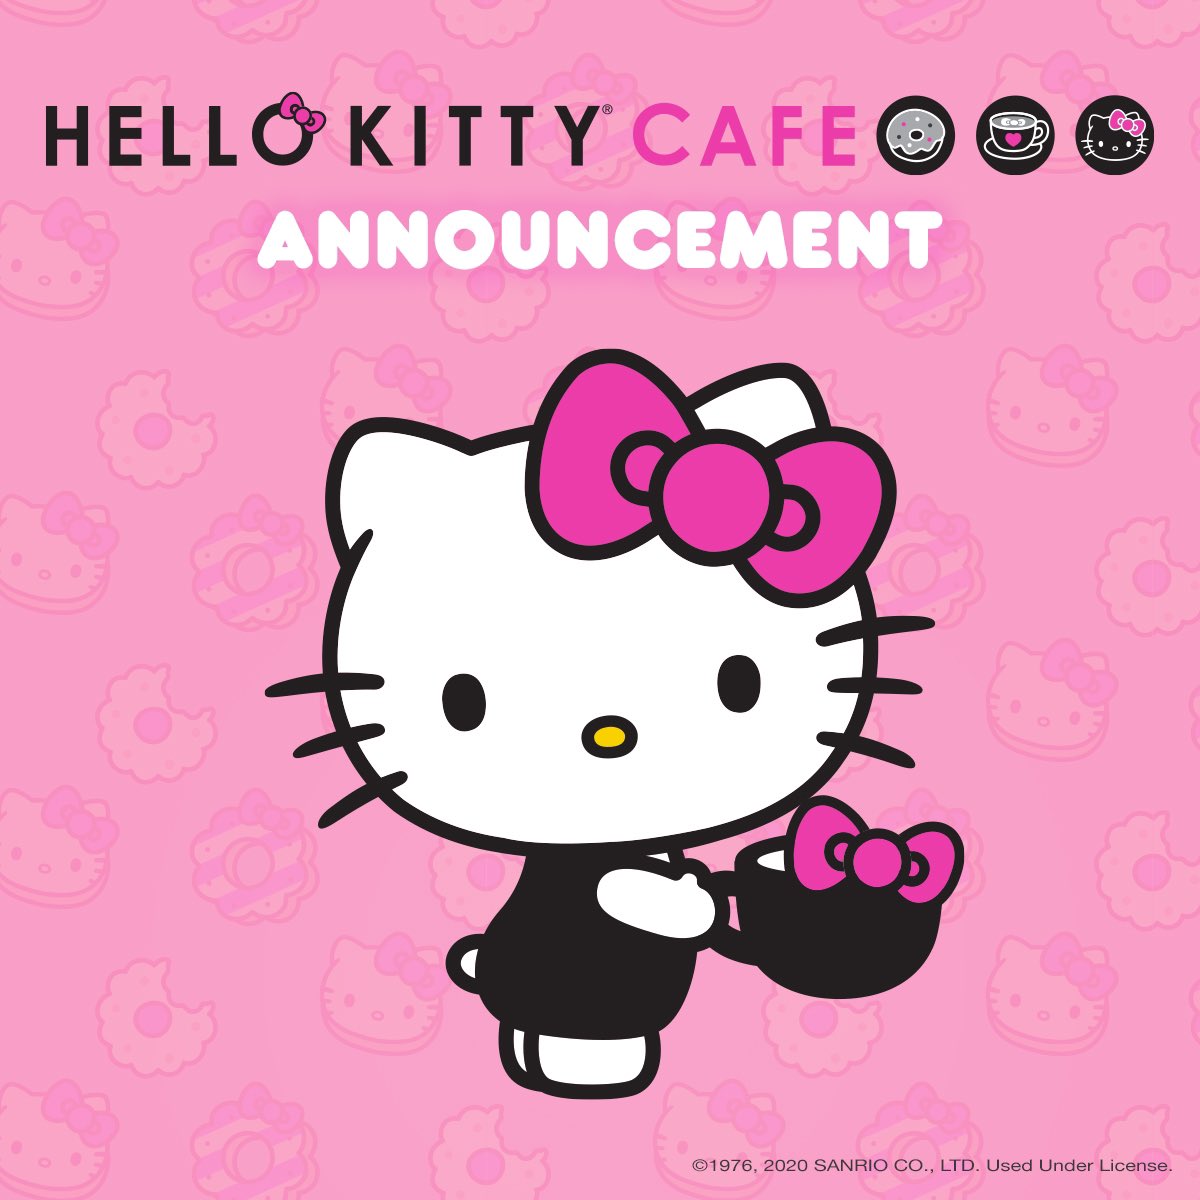 Hello Kitty Cafe Our Valued Hello Kitty Cafe Customers: As We Follow The Latest Communications Surrounding The Novel Coronavirus (COVID 19), We Wanted To Share The Specific Measures That Hello